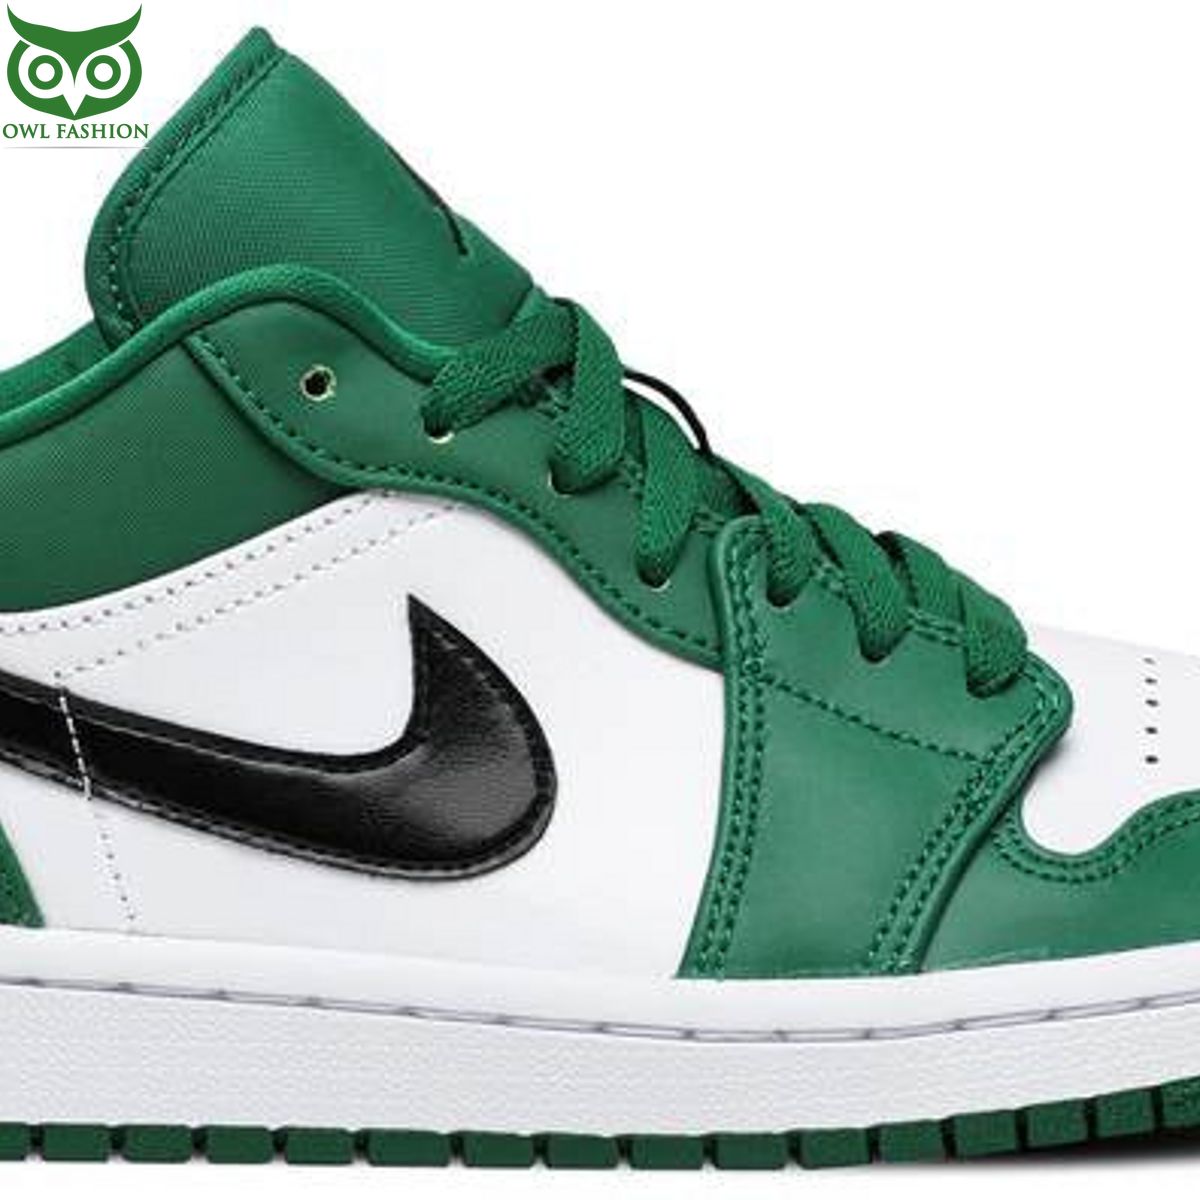 Air Jordan 1 Low Pine Green Beauty lies within for those who choose to see.